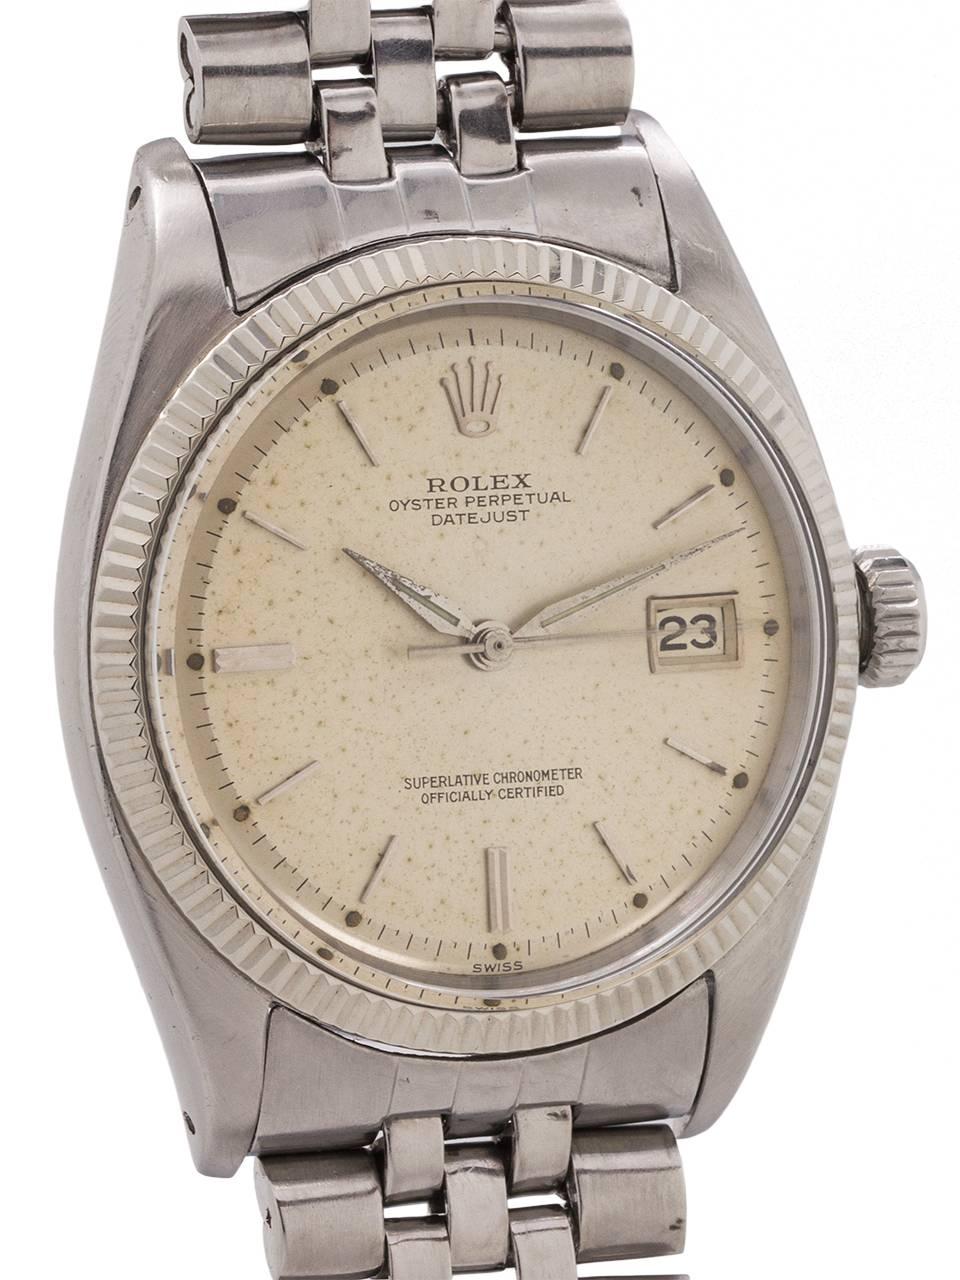 Very pleasing example early vintage Rolex stainless steel Datejust ref# 1601 serial # 657,xxx circa 1961. Featuring a 36mm diameter Oyster case with finely milled 14K WG bezel, acrylic crystal, and original, lightly spotted, silvered satin dial with